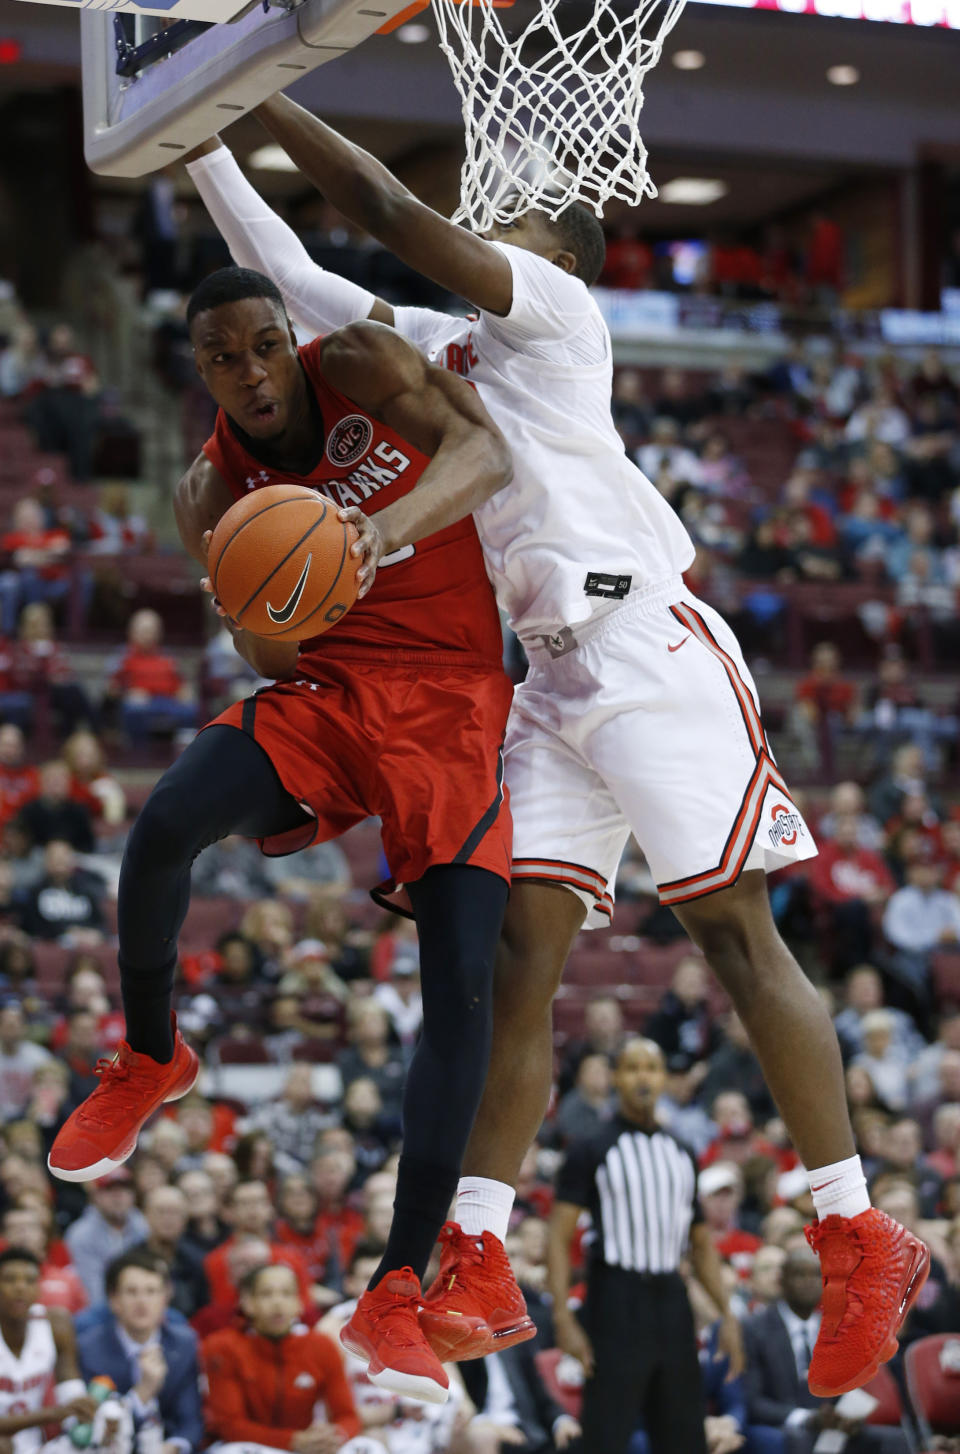 Southeast Missouri State's Quatarrius Wilson, left, passes the ball underneath the basket as Ohio State's E.J. Liddell defends during the first half of an NCAA college basketball game, Tuesday, Dec. 17, 2019, in Columbus, Ohio. (AP Photo/Jay LaPrete)